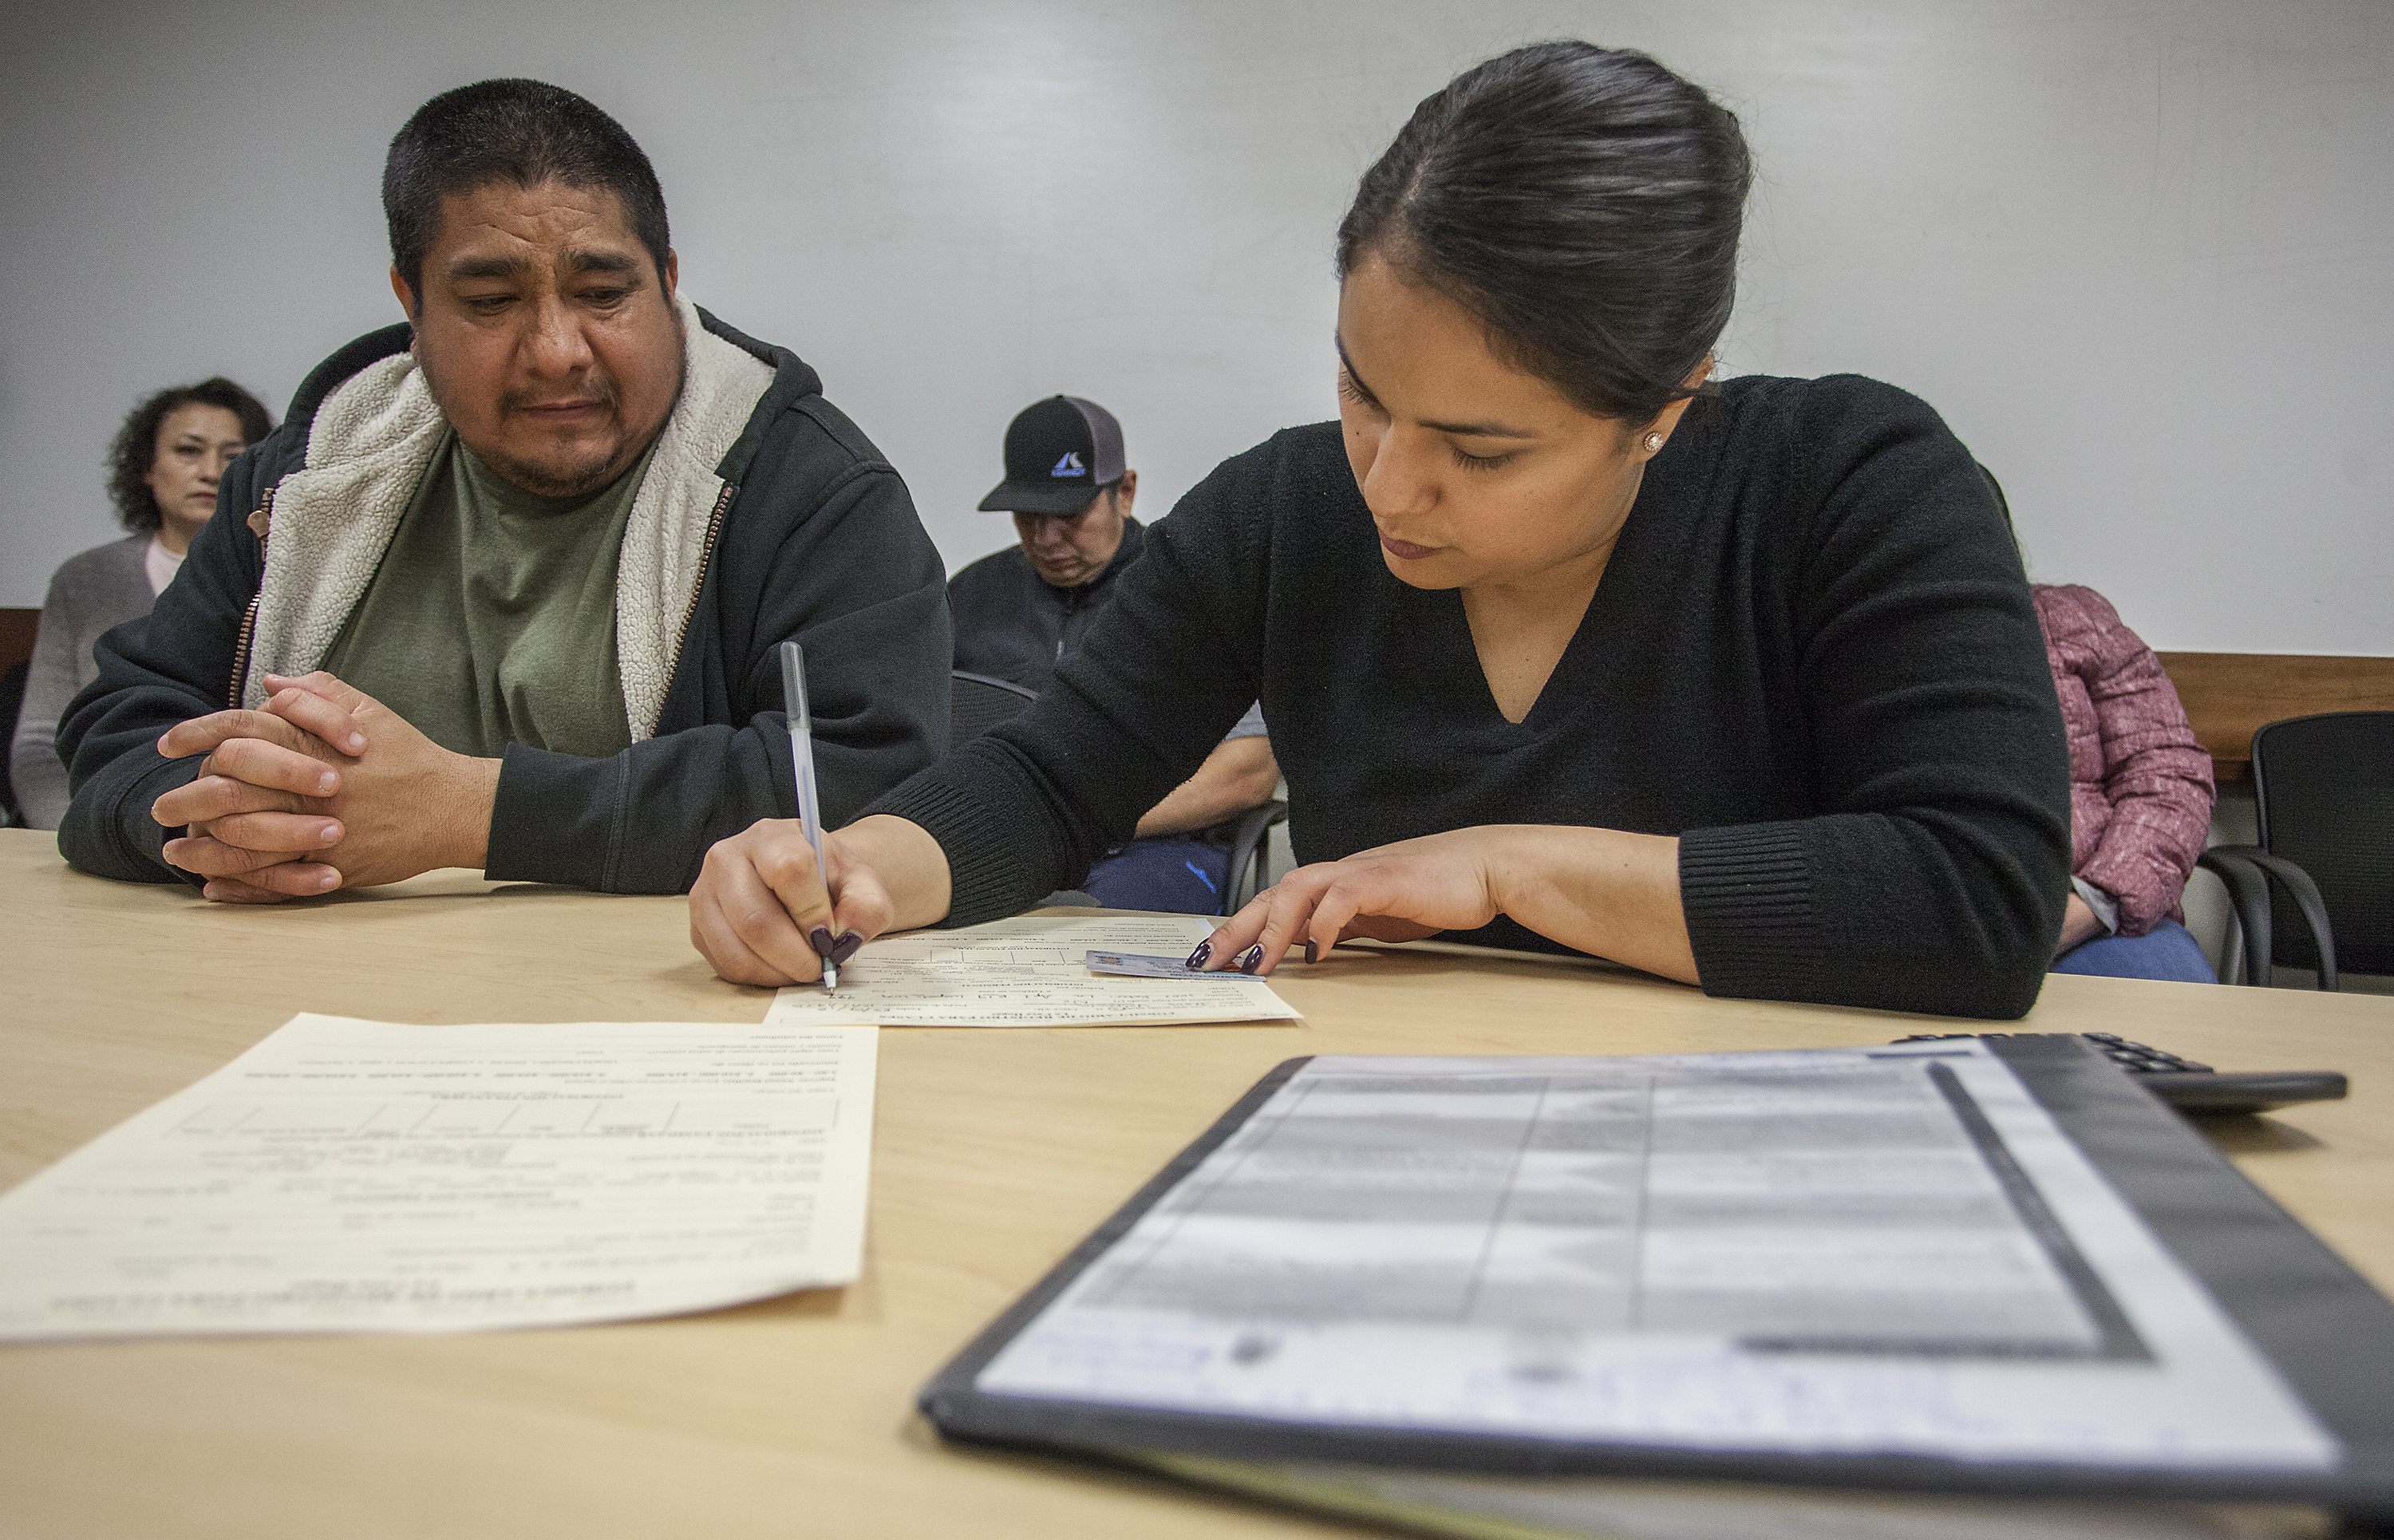 People register for citizenship classes offered by La Casa Hogar March 14, 2018 at the Yakima Valley Farmworkers Clinic in Toppenish, Wash. (GORDON KING/Gordon King Photography)